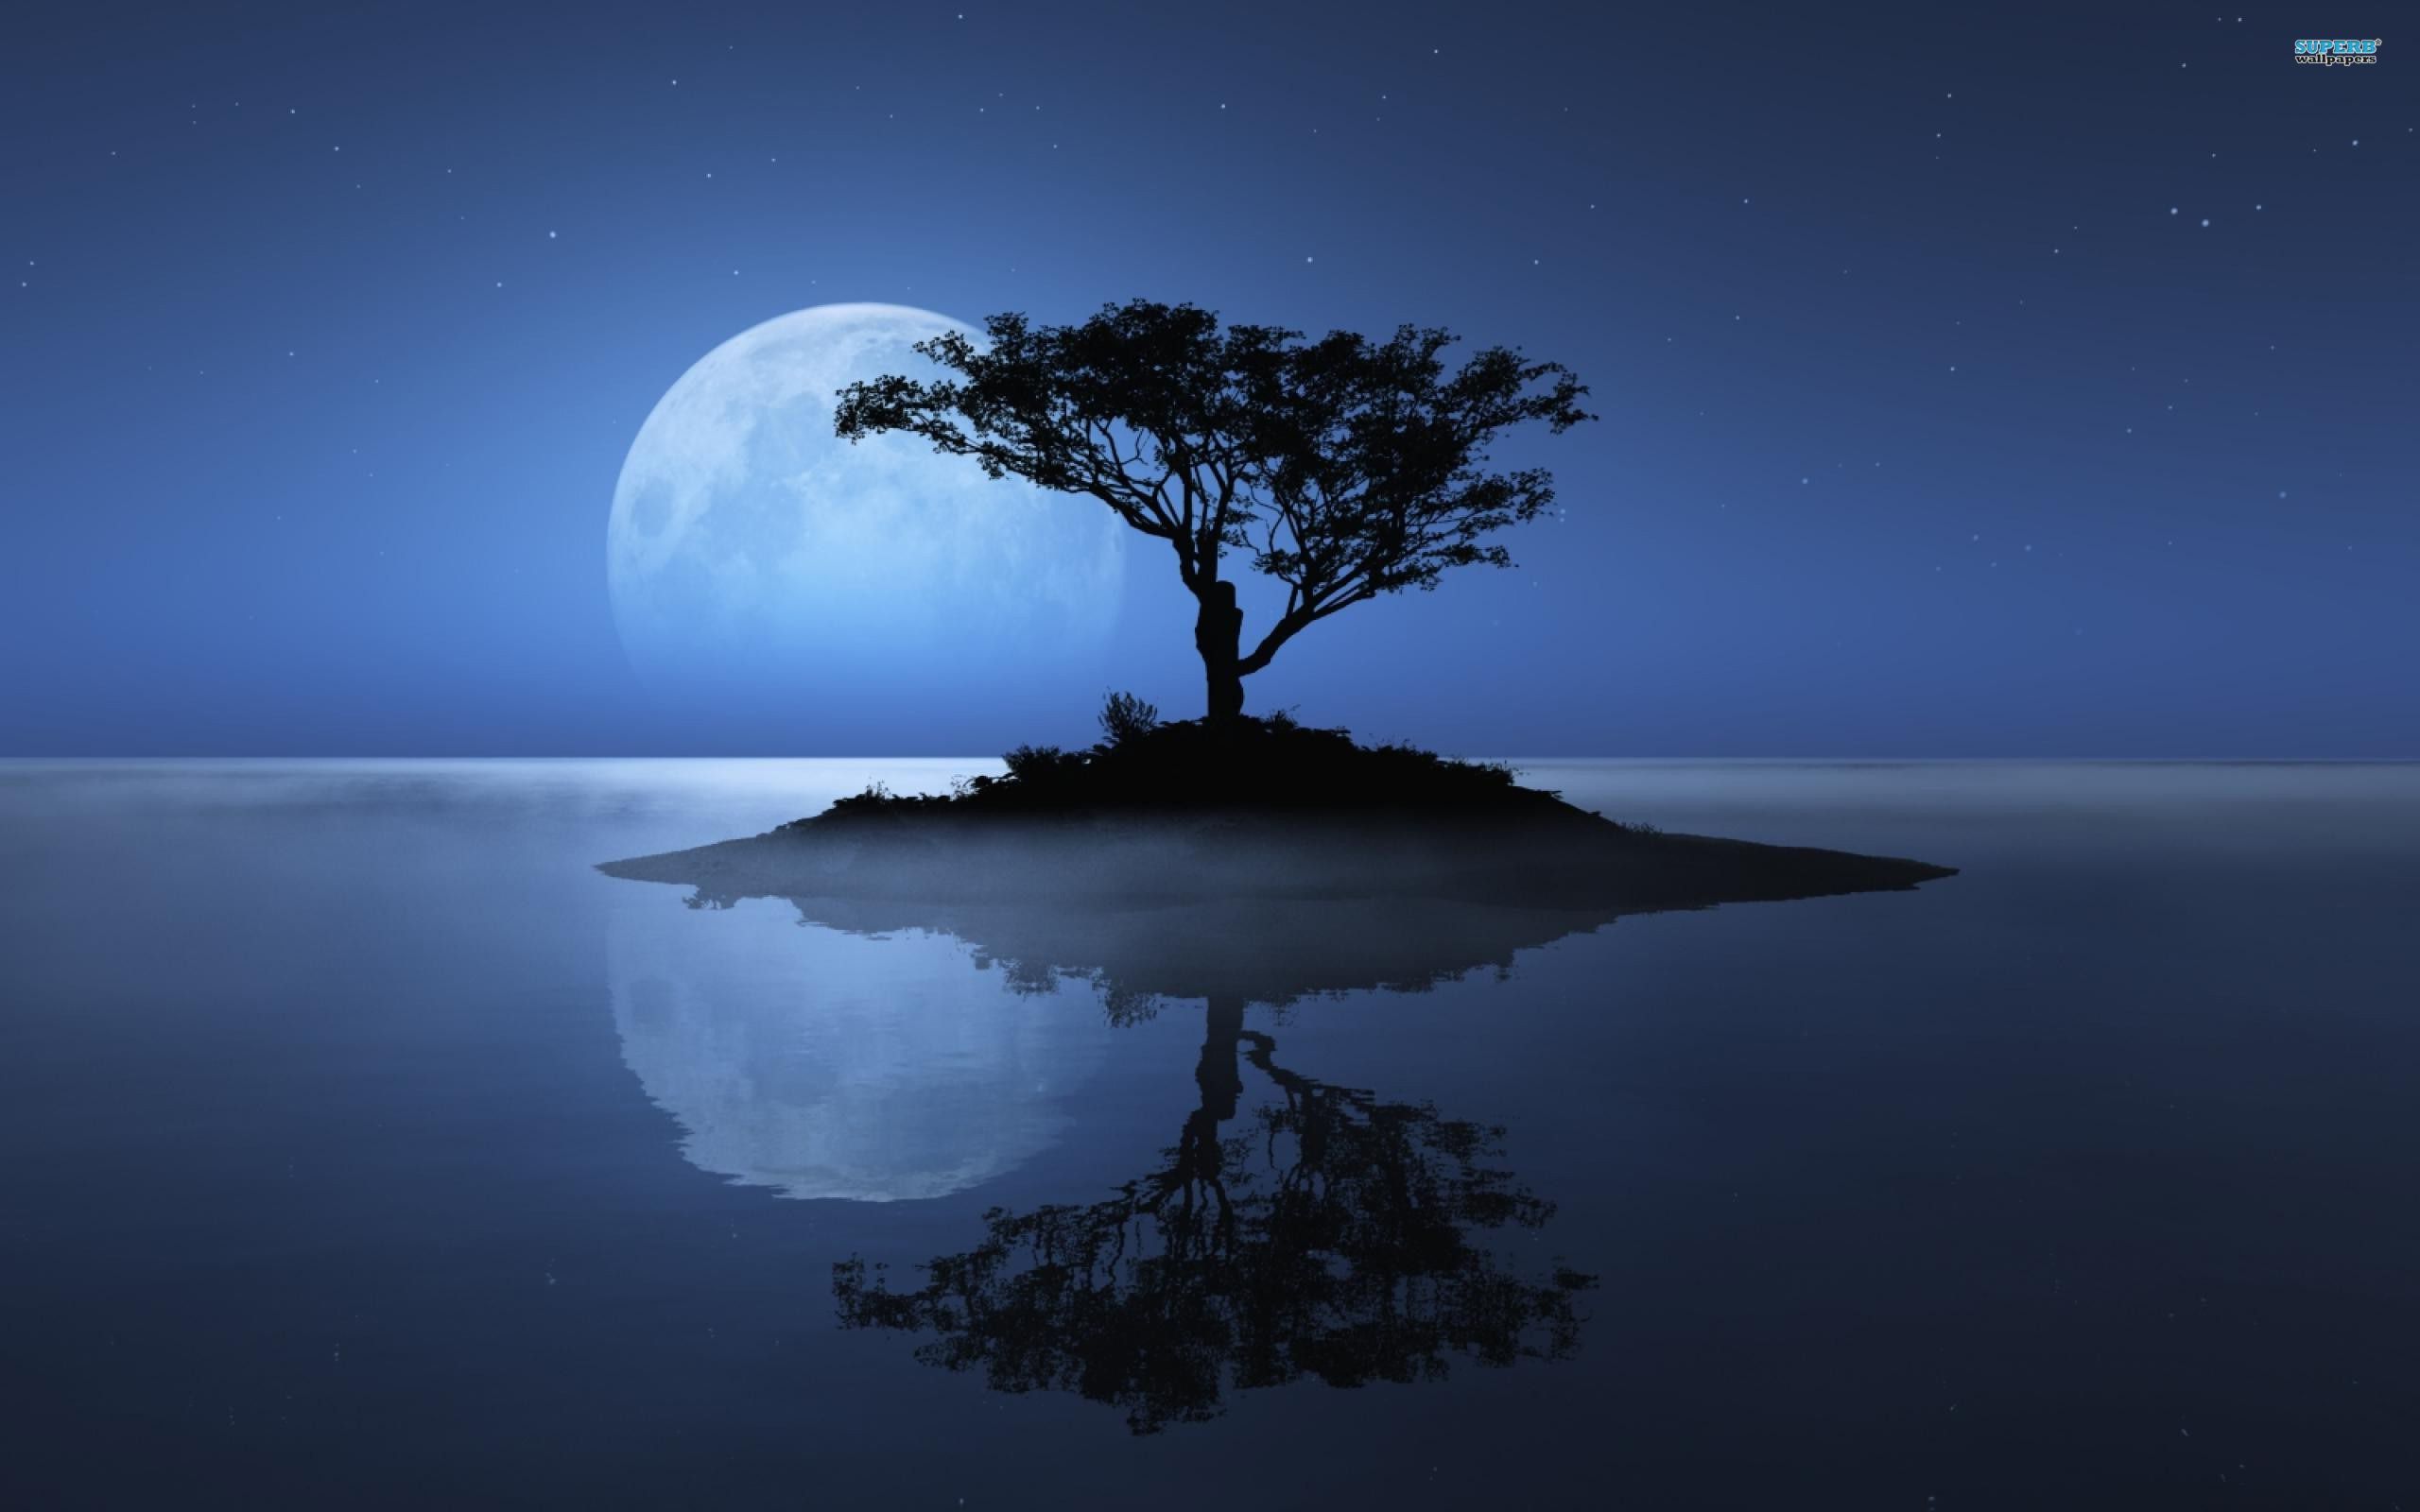 Blue moon over the water wallpaper - Fantasy wallpapers - #12483